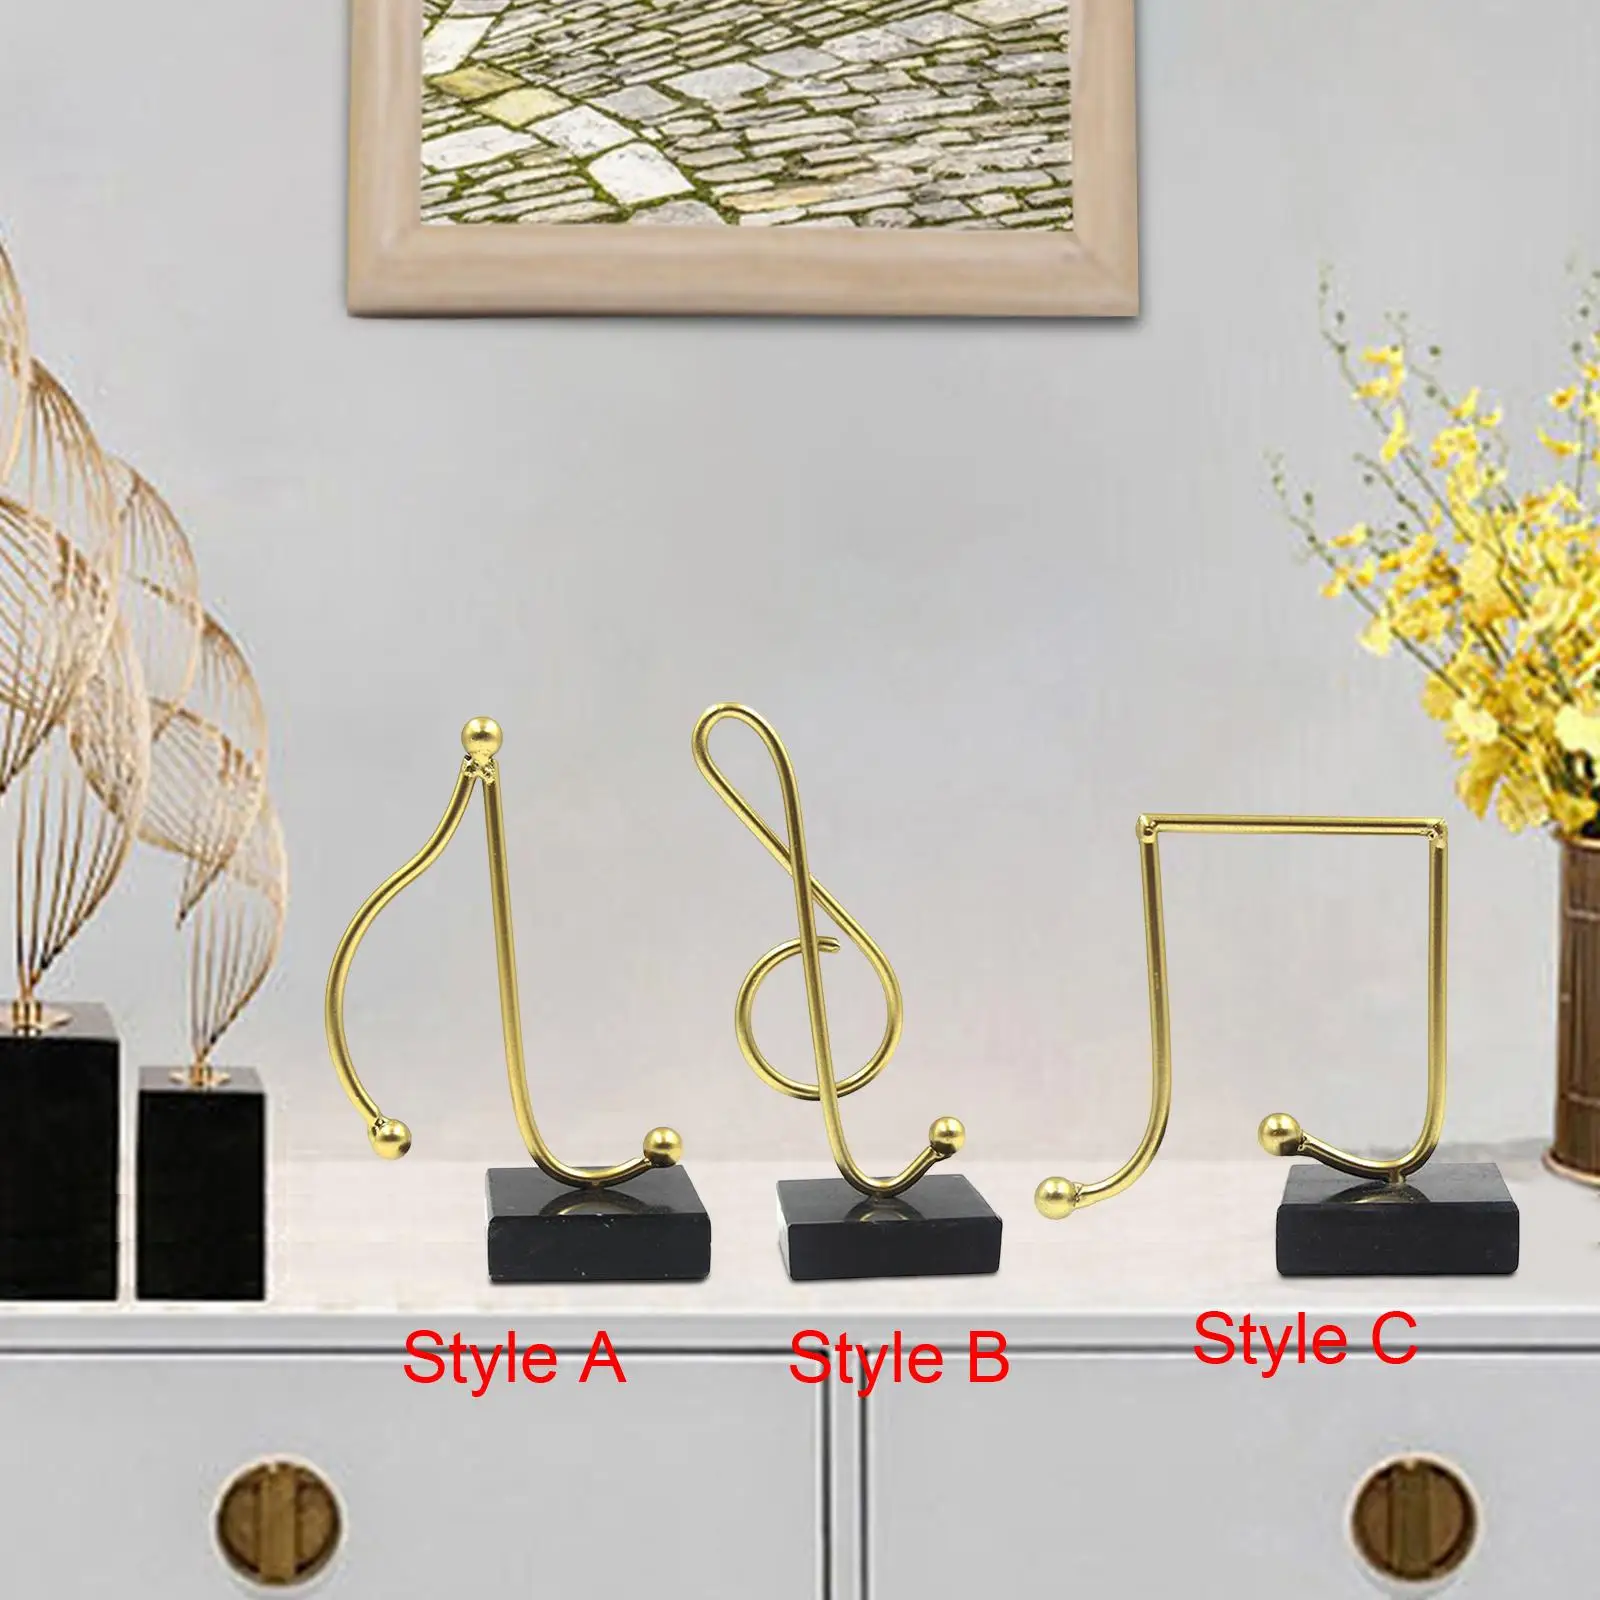 Luxury Musical Note Statue Art Decorative Collectible Craft Ornament for Souvenir Living Room Bookshelf Table Decoration